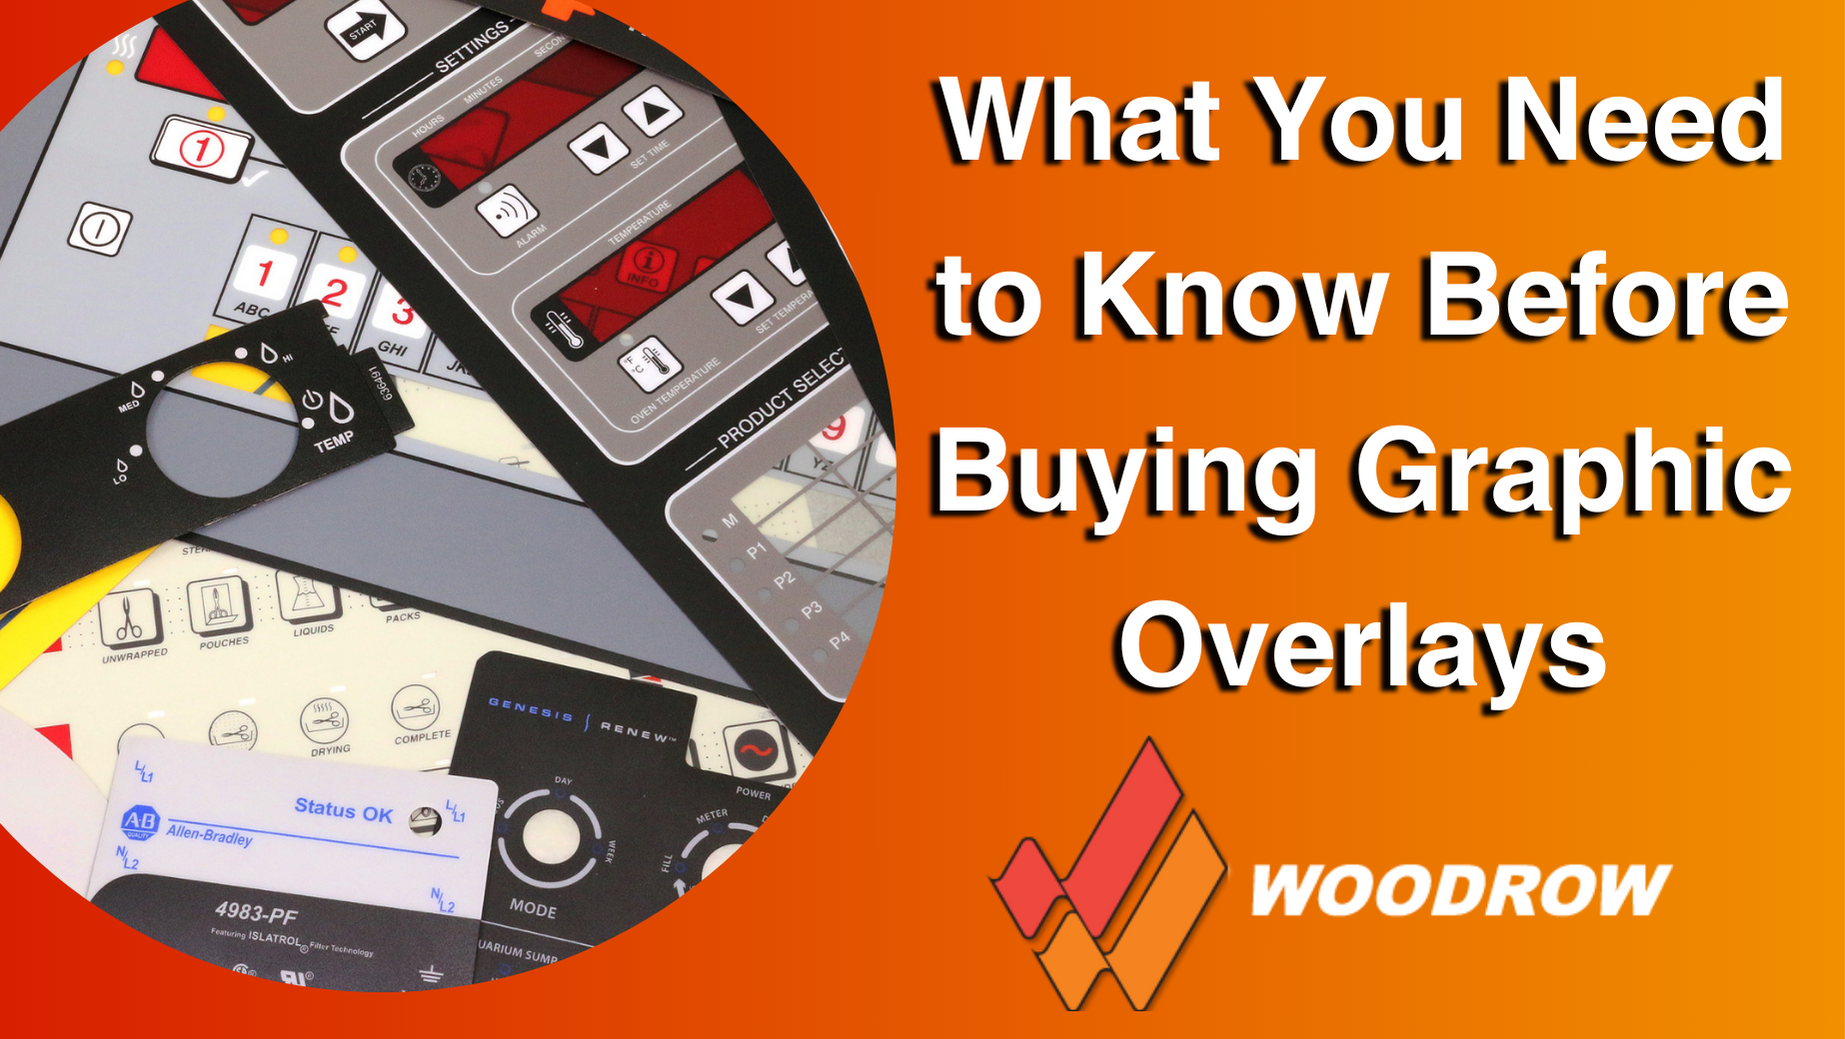 What You Need to Know Before Buying Graphic Overlays